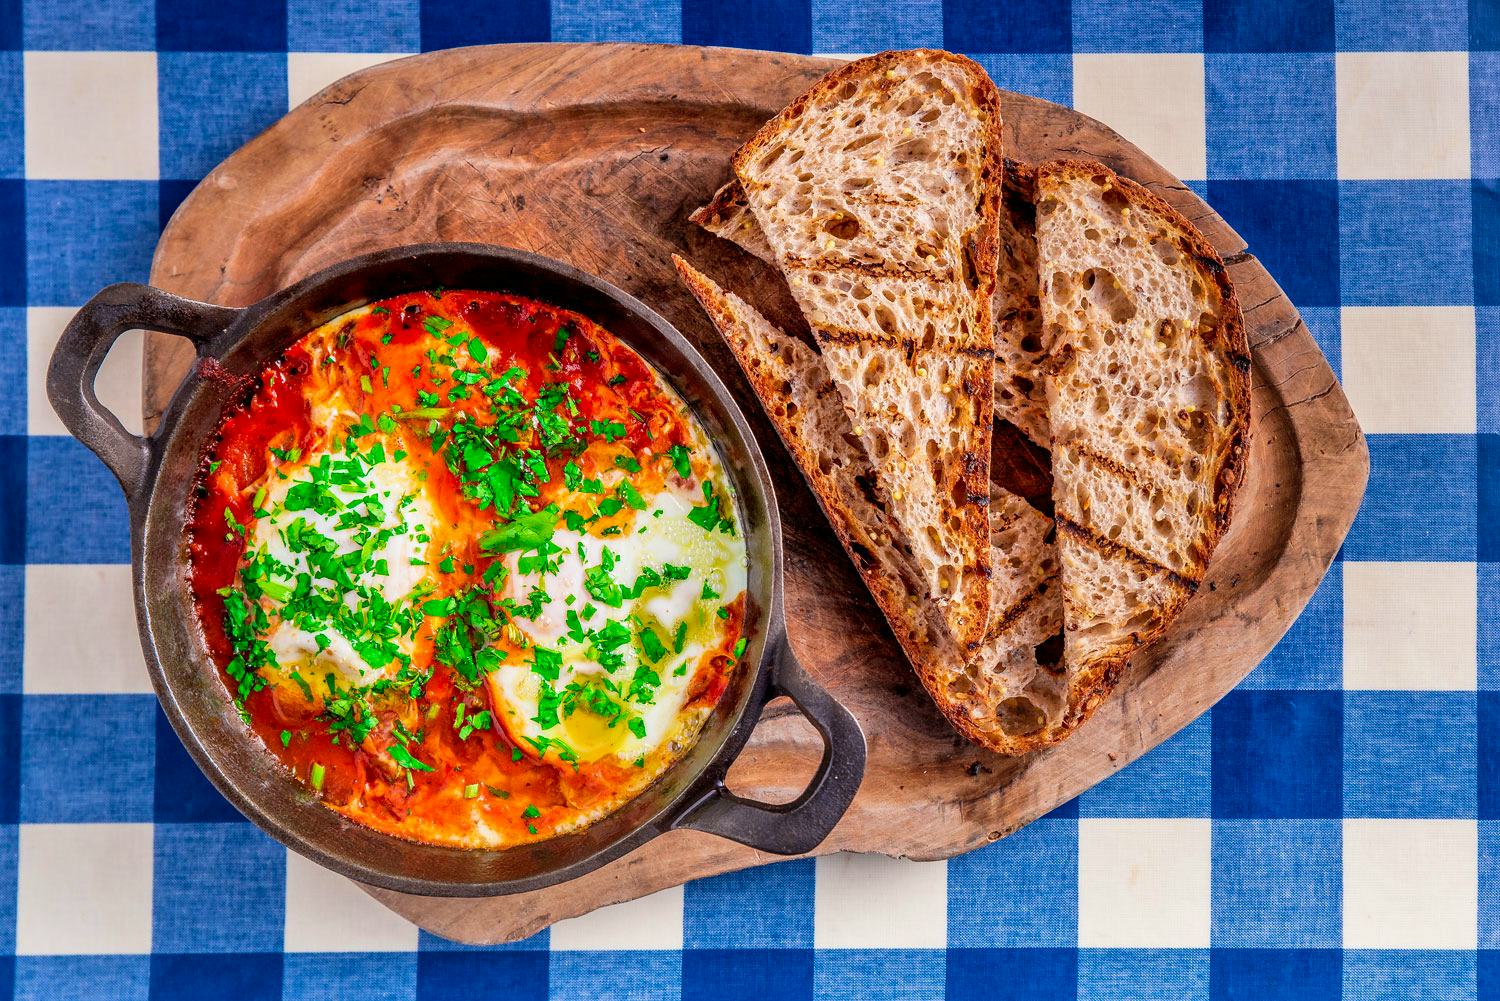 Megan's restaurants baked eggs in tomatoes with bread